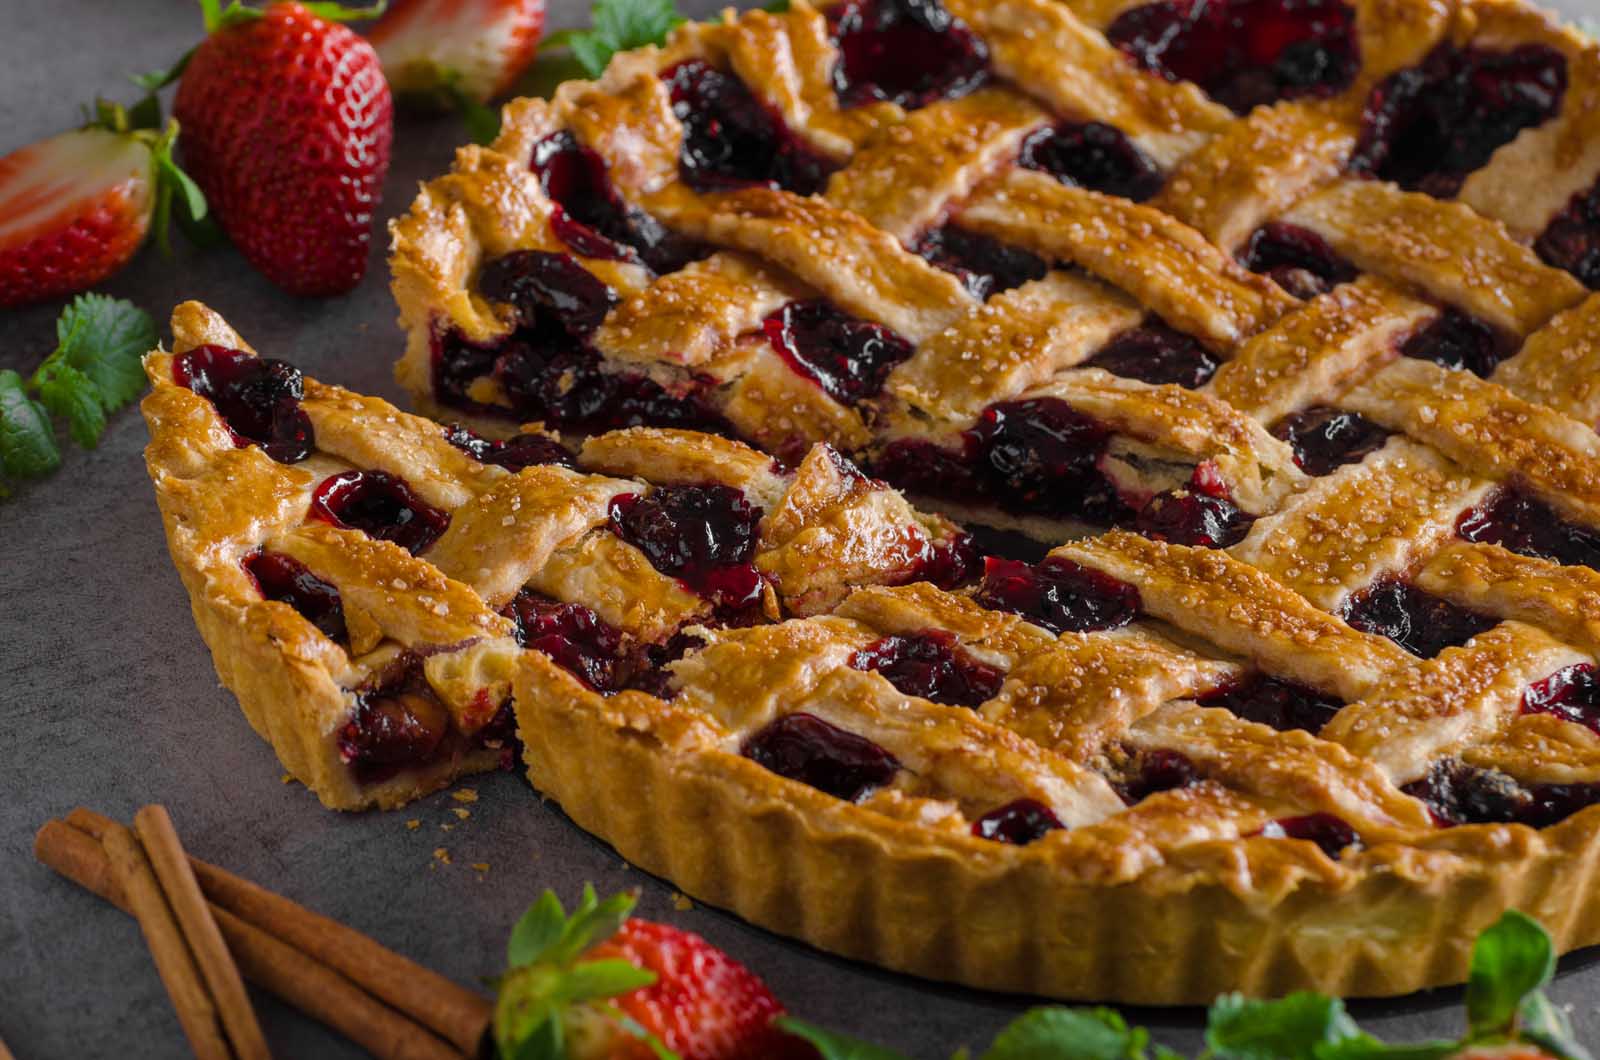 saskatoon berry pie best traditional canadian foods from the Prairies